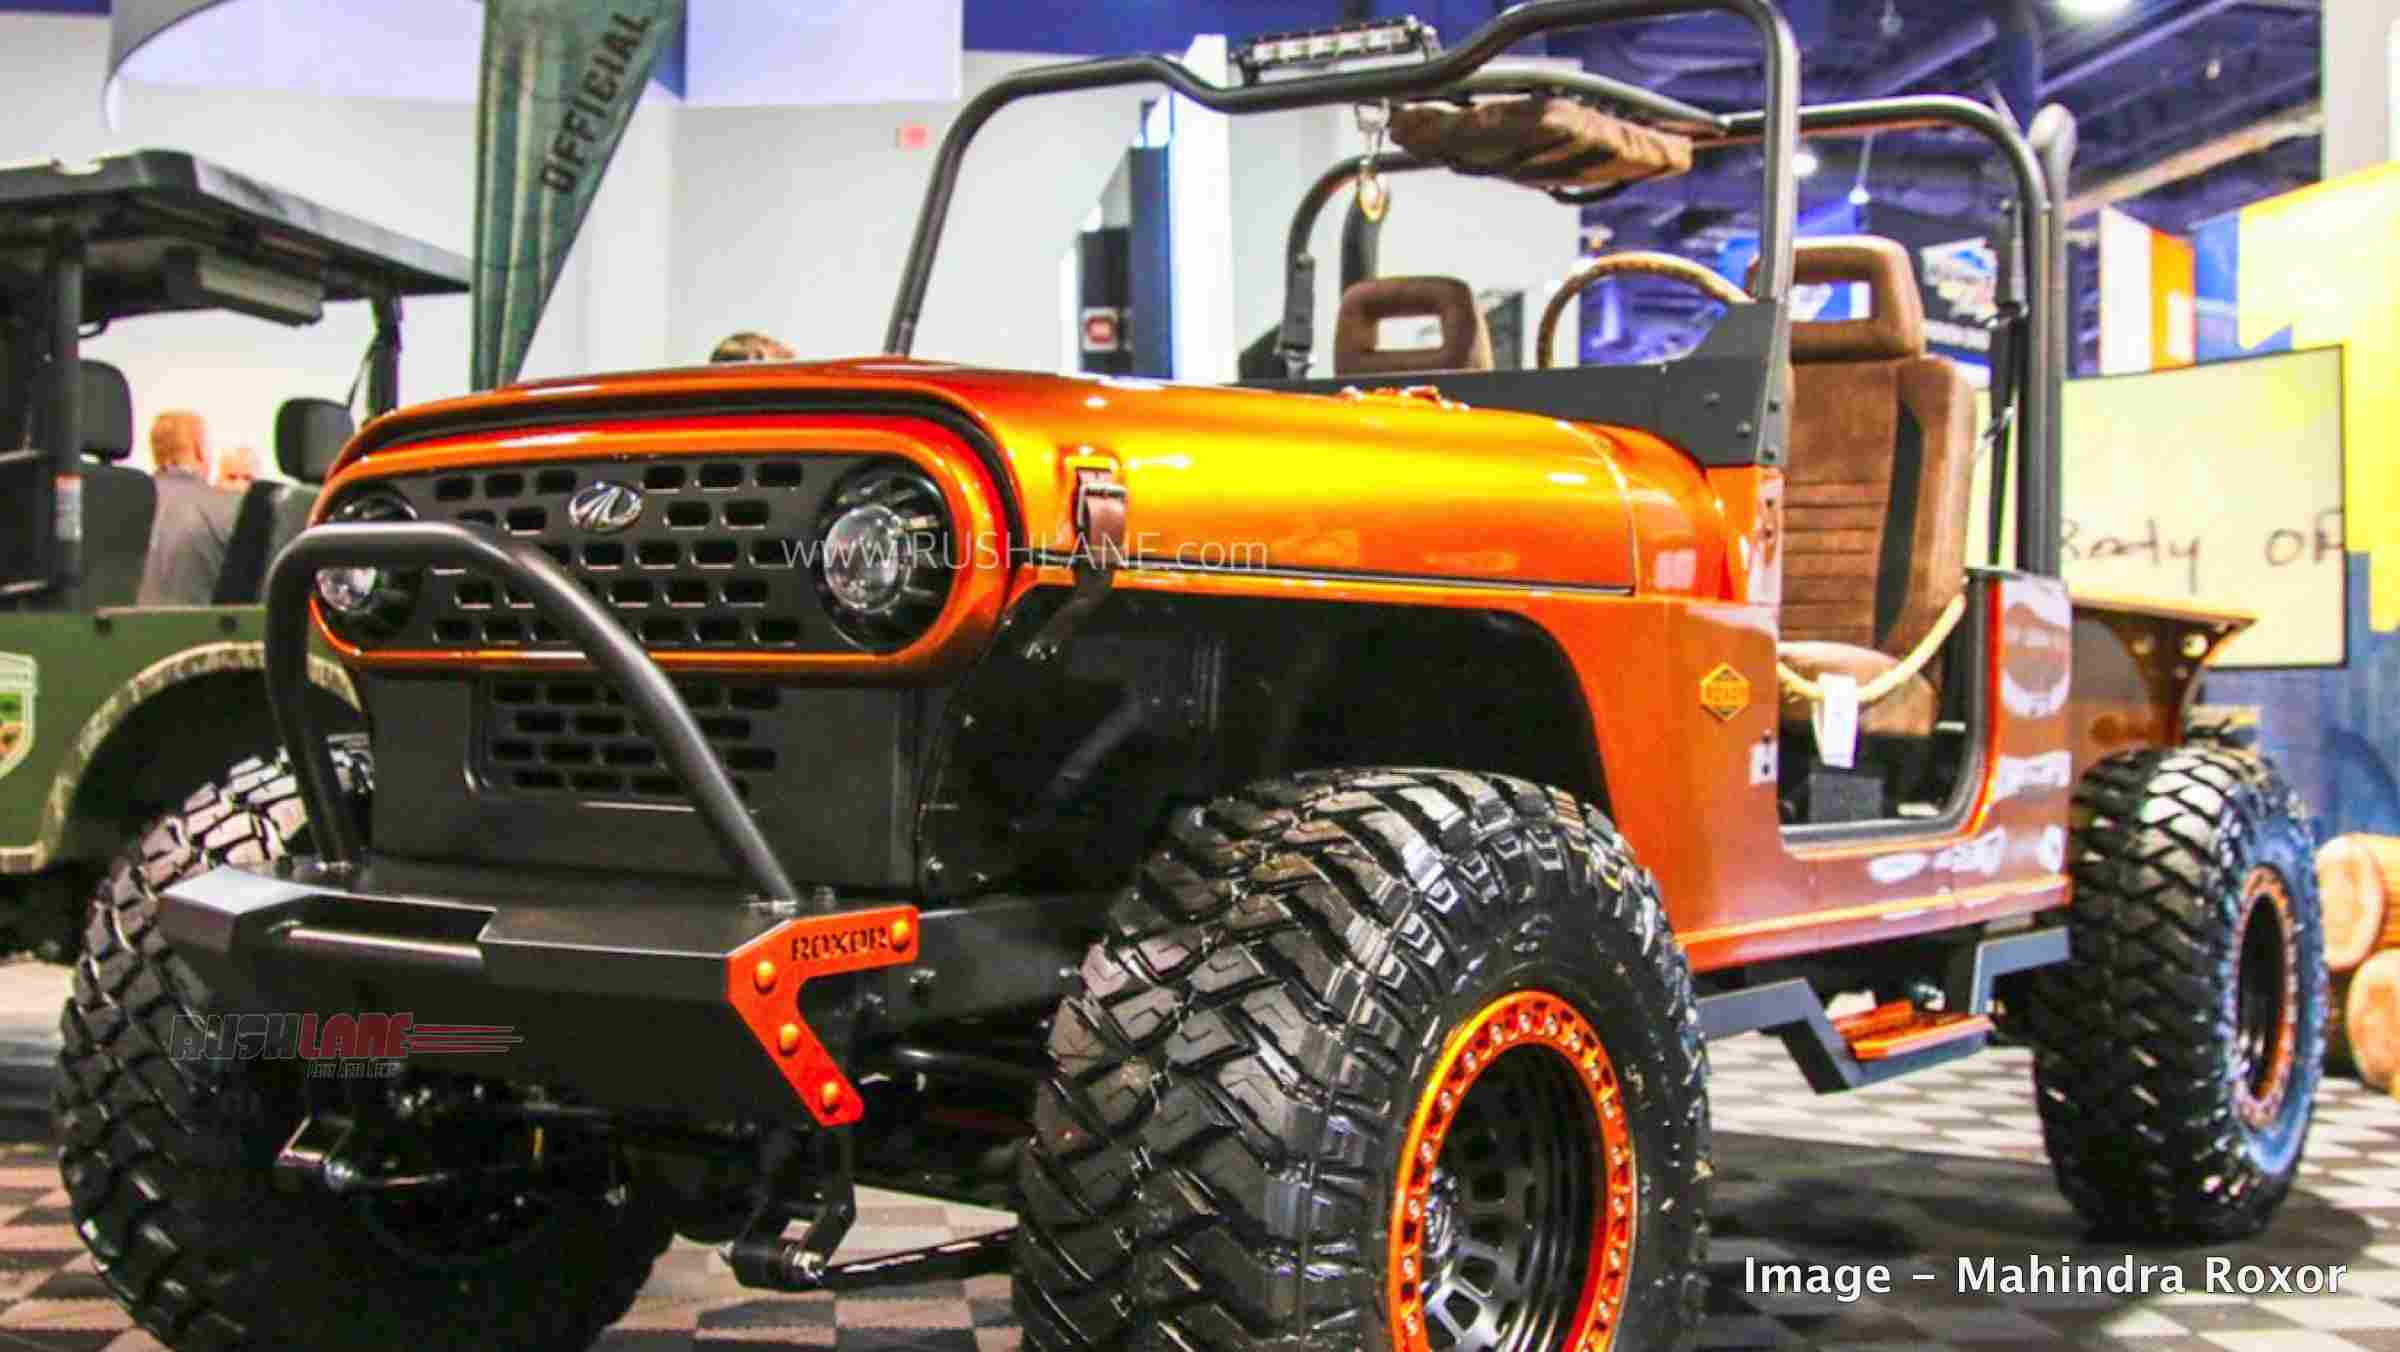 Mahindra Thar Based Roxor Gets New Front After Legal Battle With Jeep